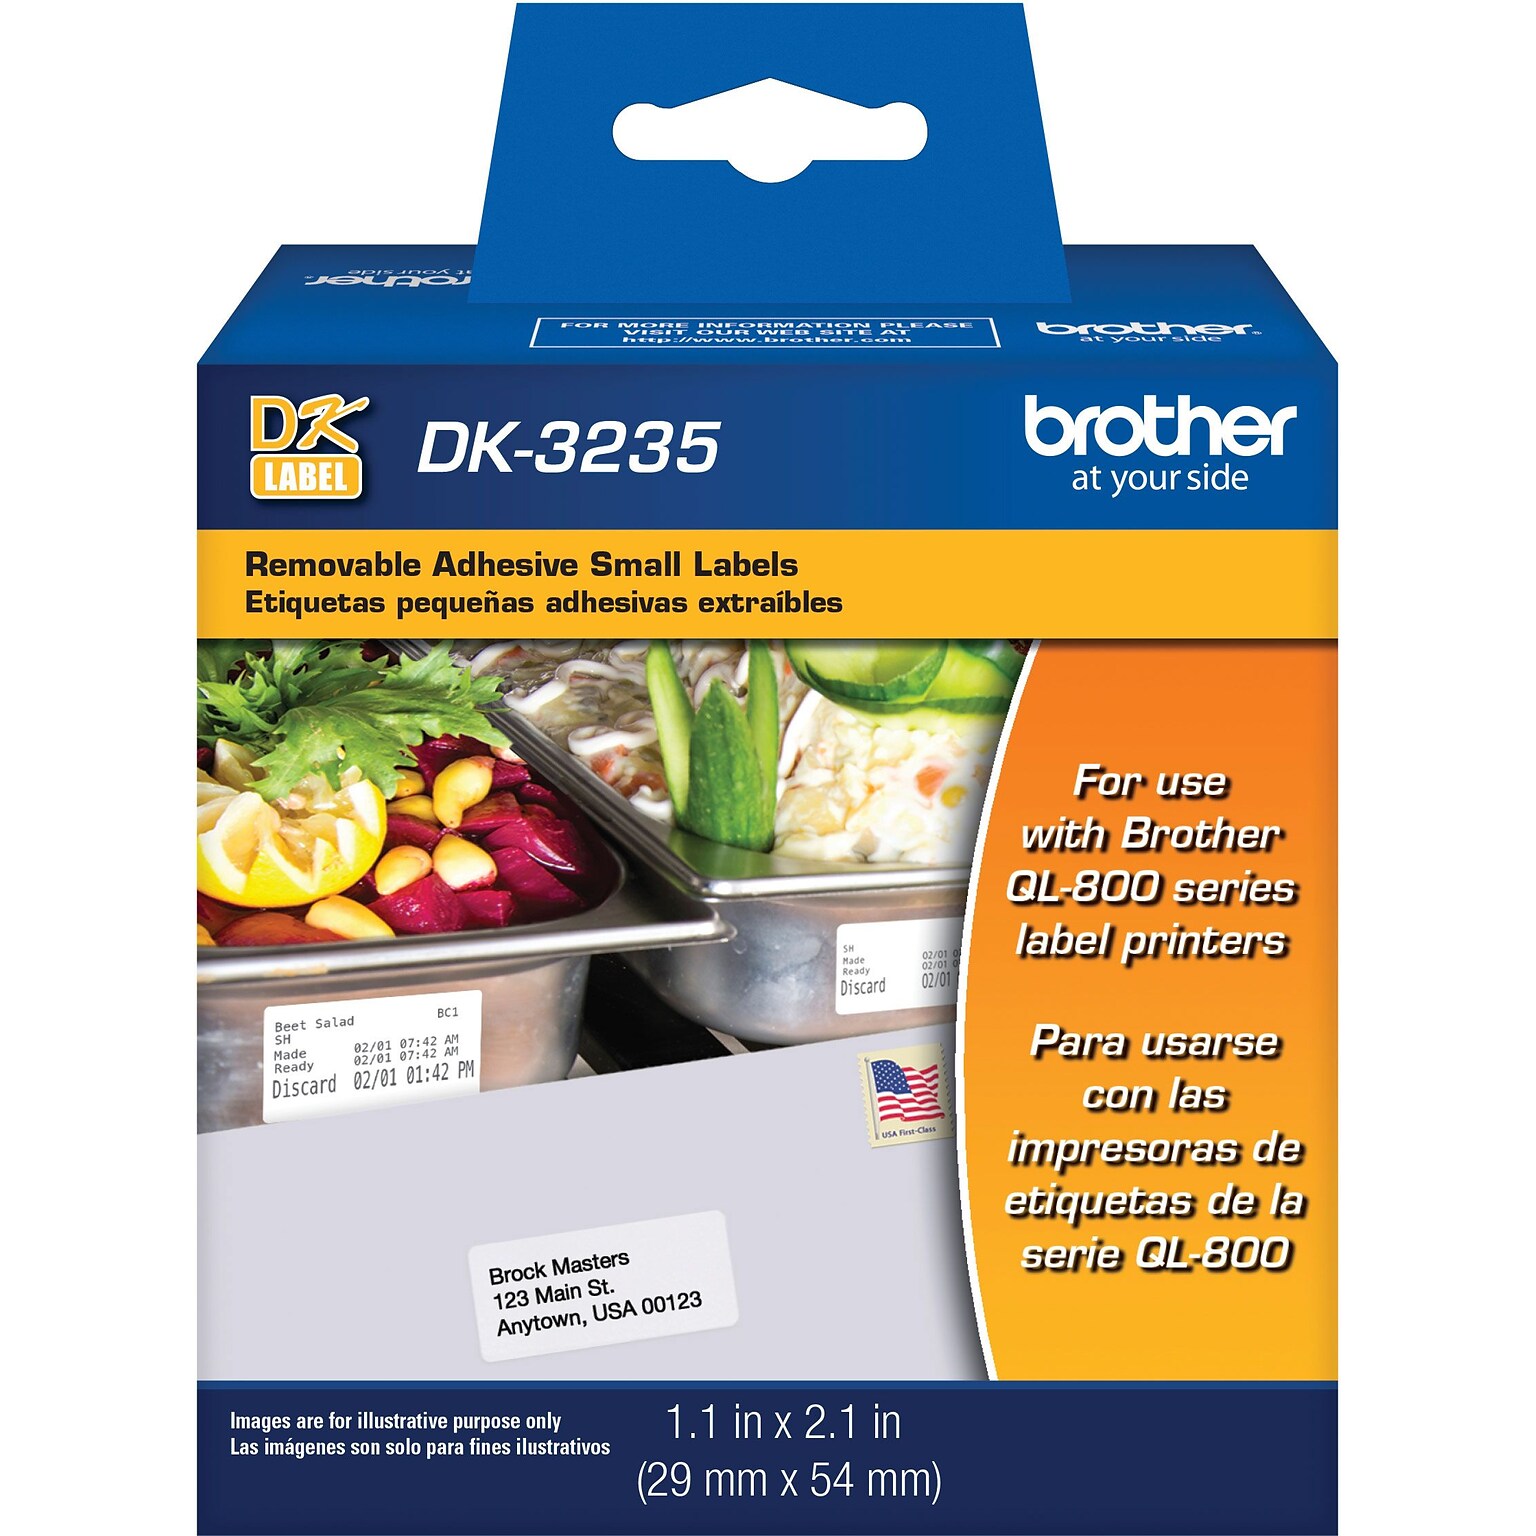 Brother DK-3235 Removable Adhesive Paper Labels, 2-1/10 x 1-1/10, Black on White, 800 Labels/Roll (DK-3235)